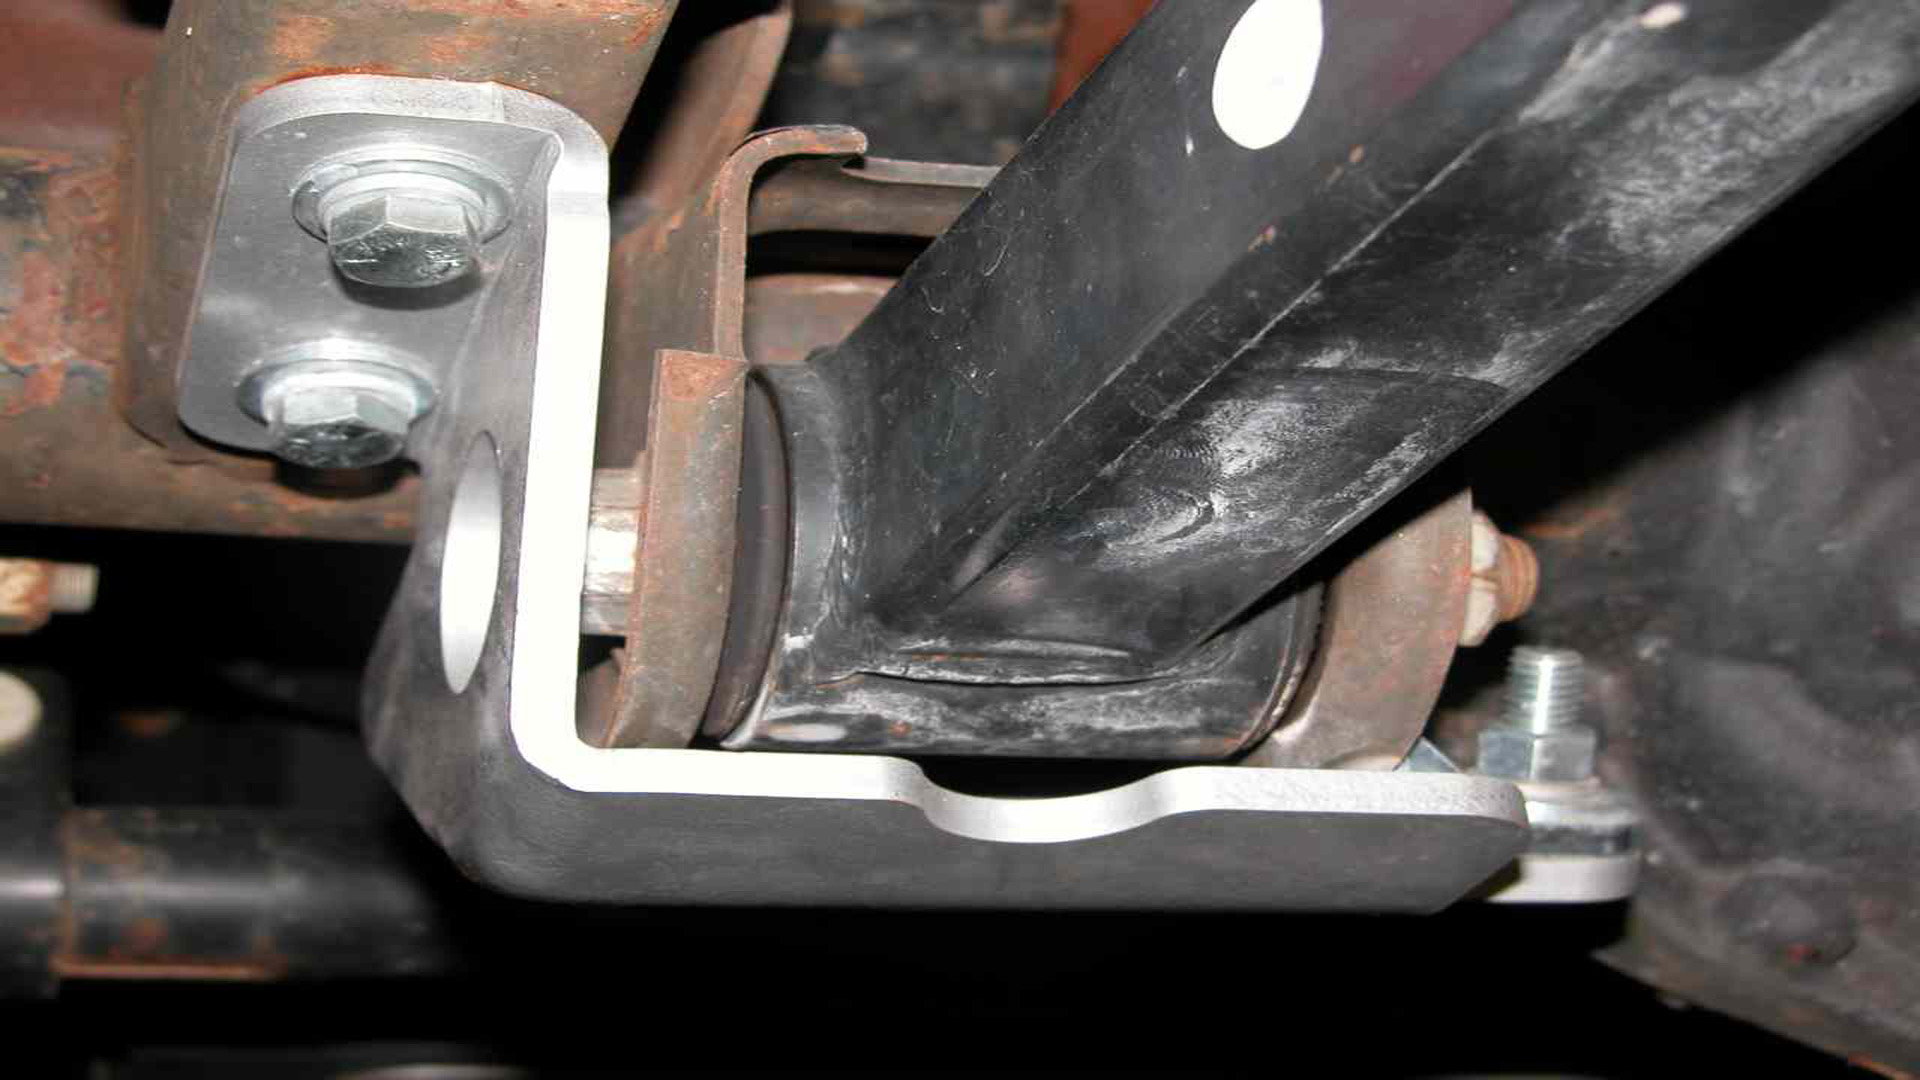 Jeep Wrangler JK: How to Install Control Arms and Review | Jk-forum